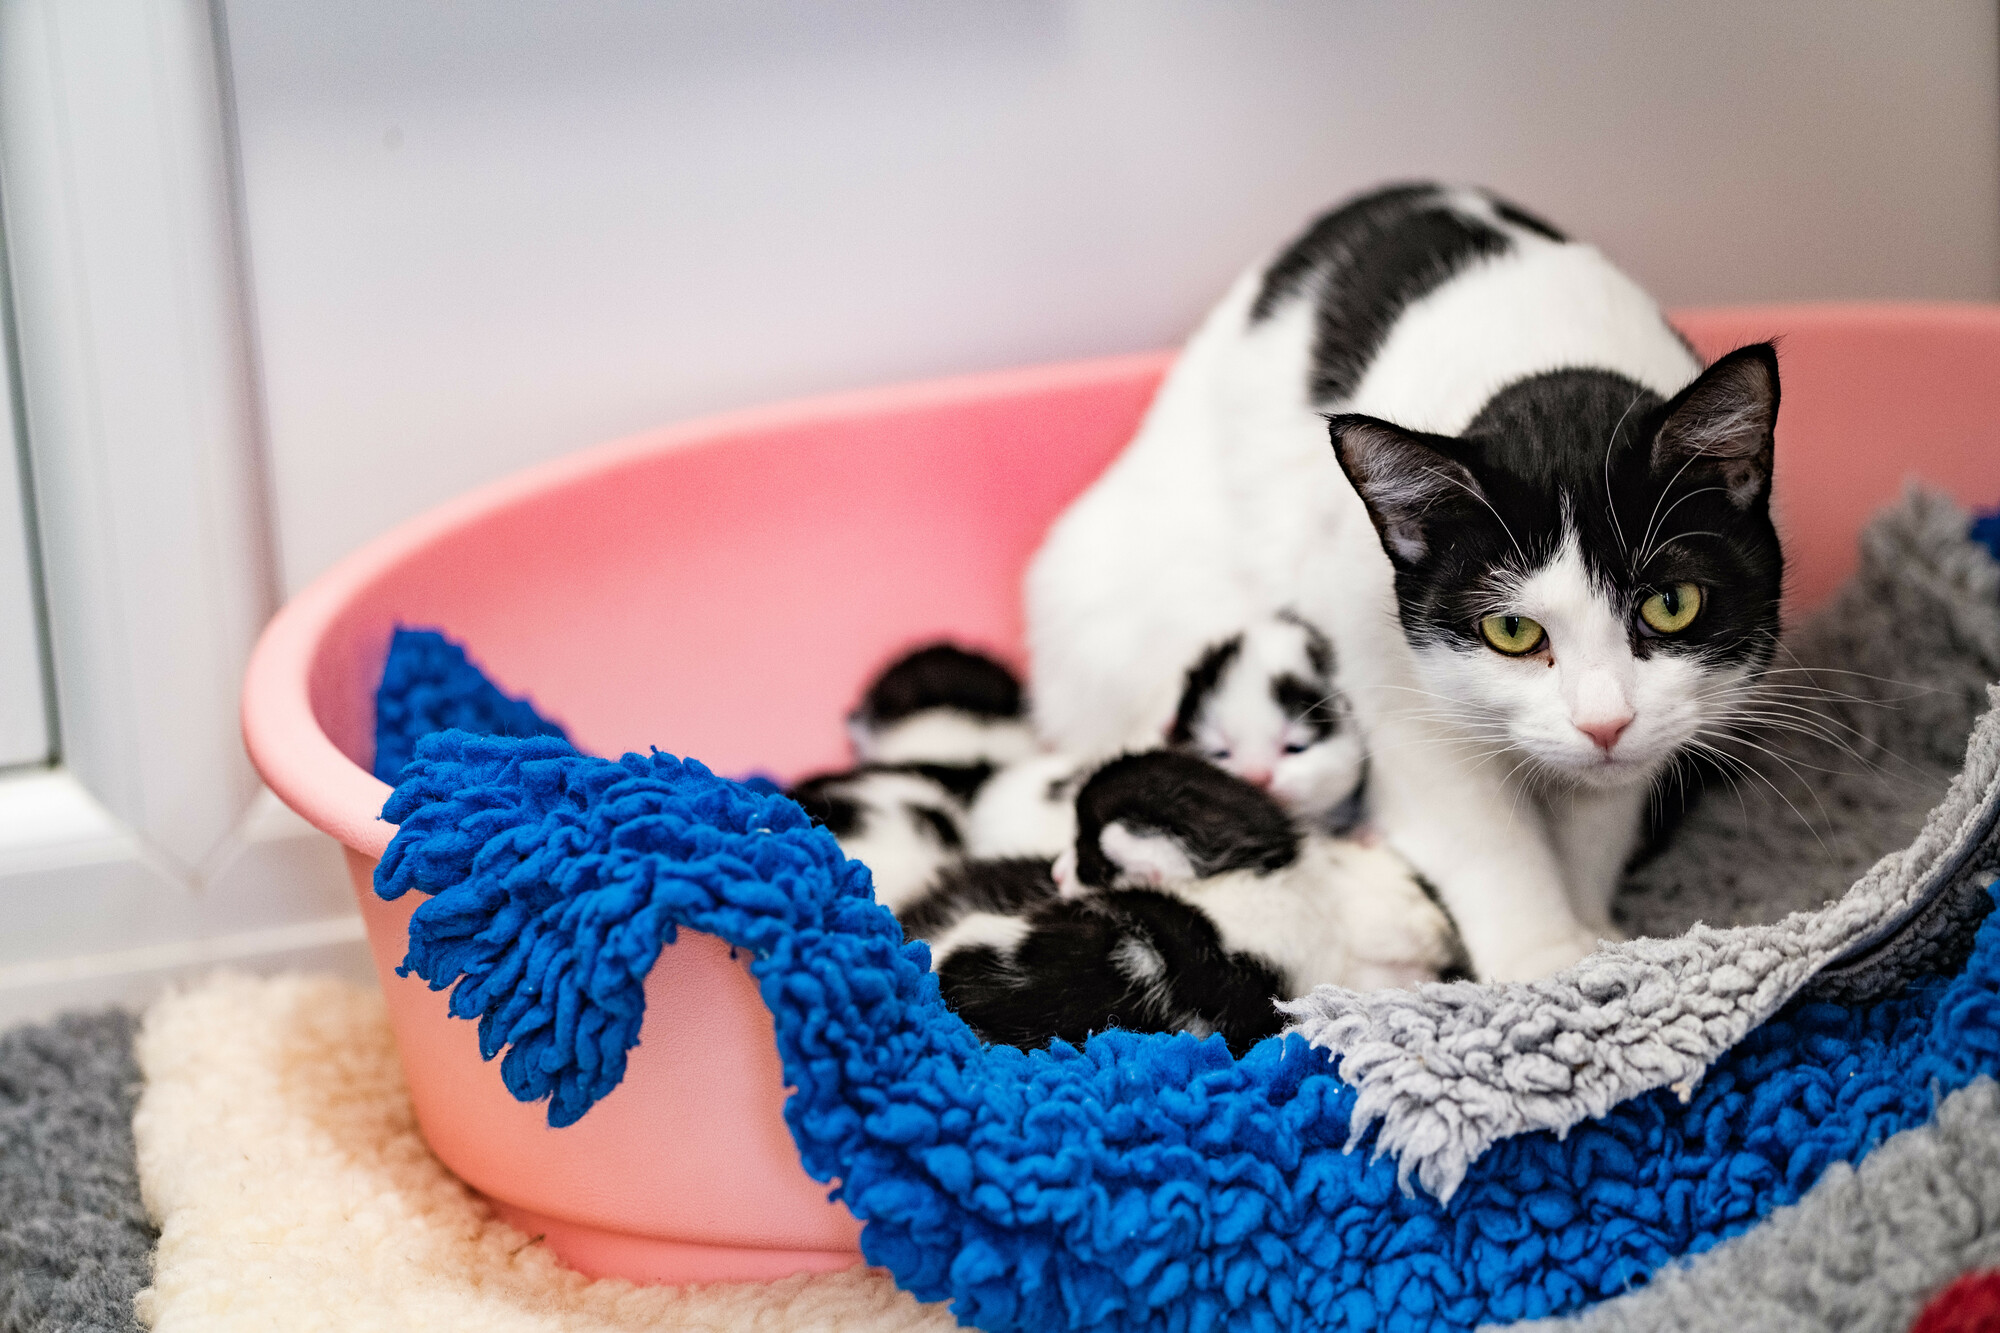 Black and white cat, Mini, in a pink cat bed surrounded by her kittens